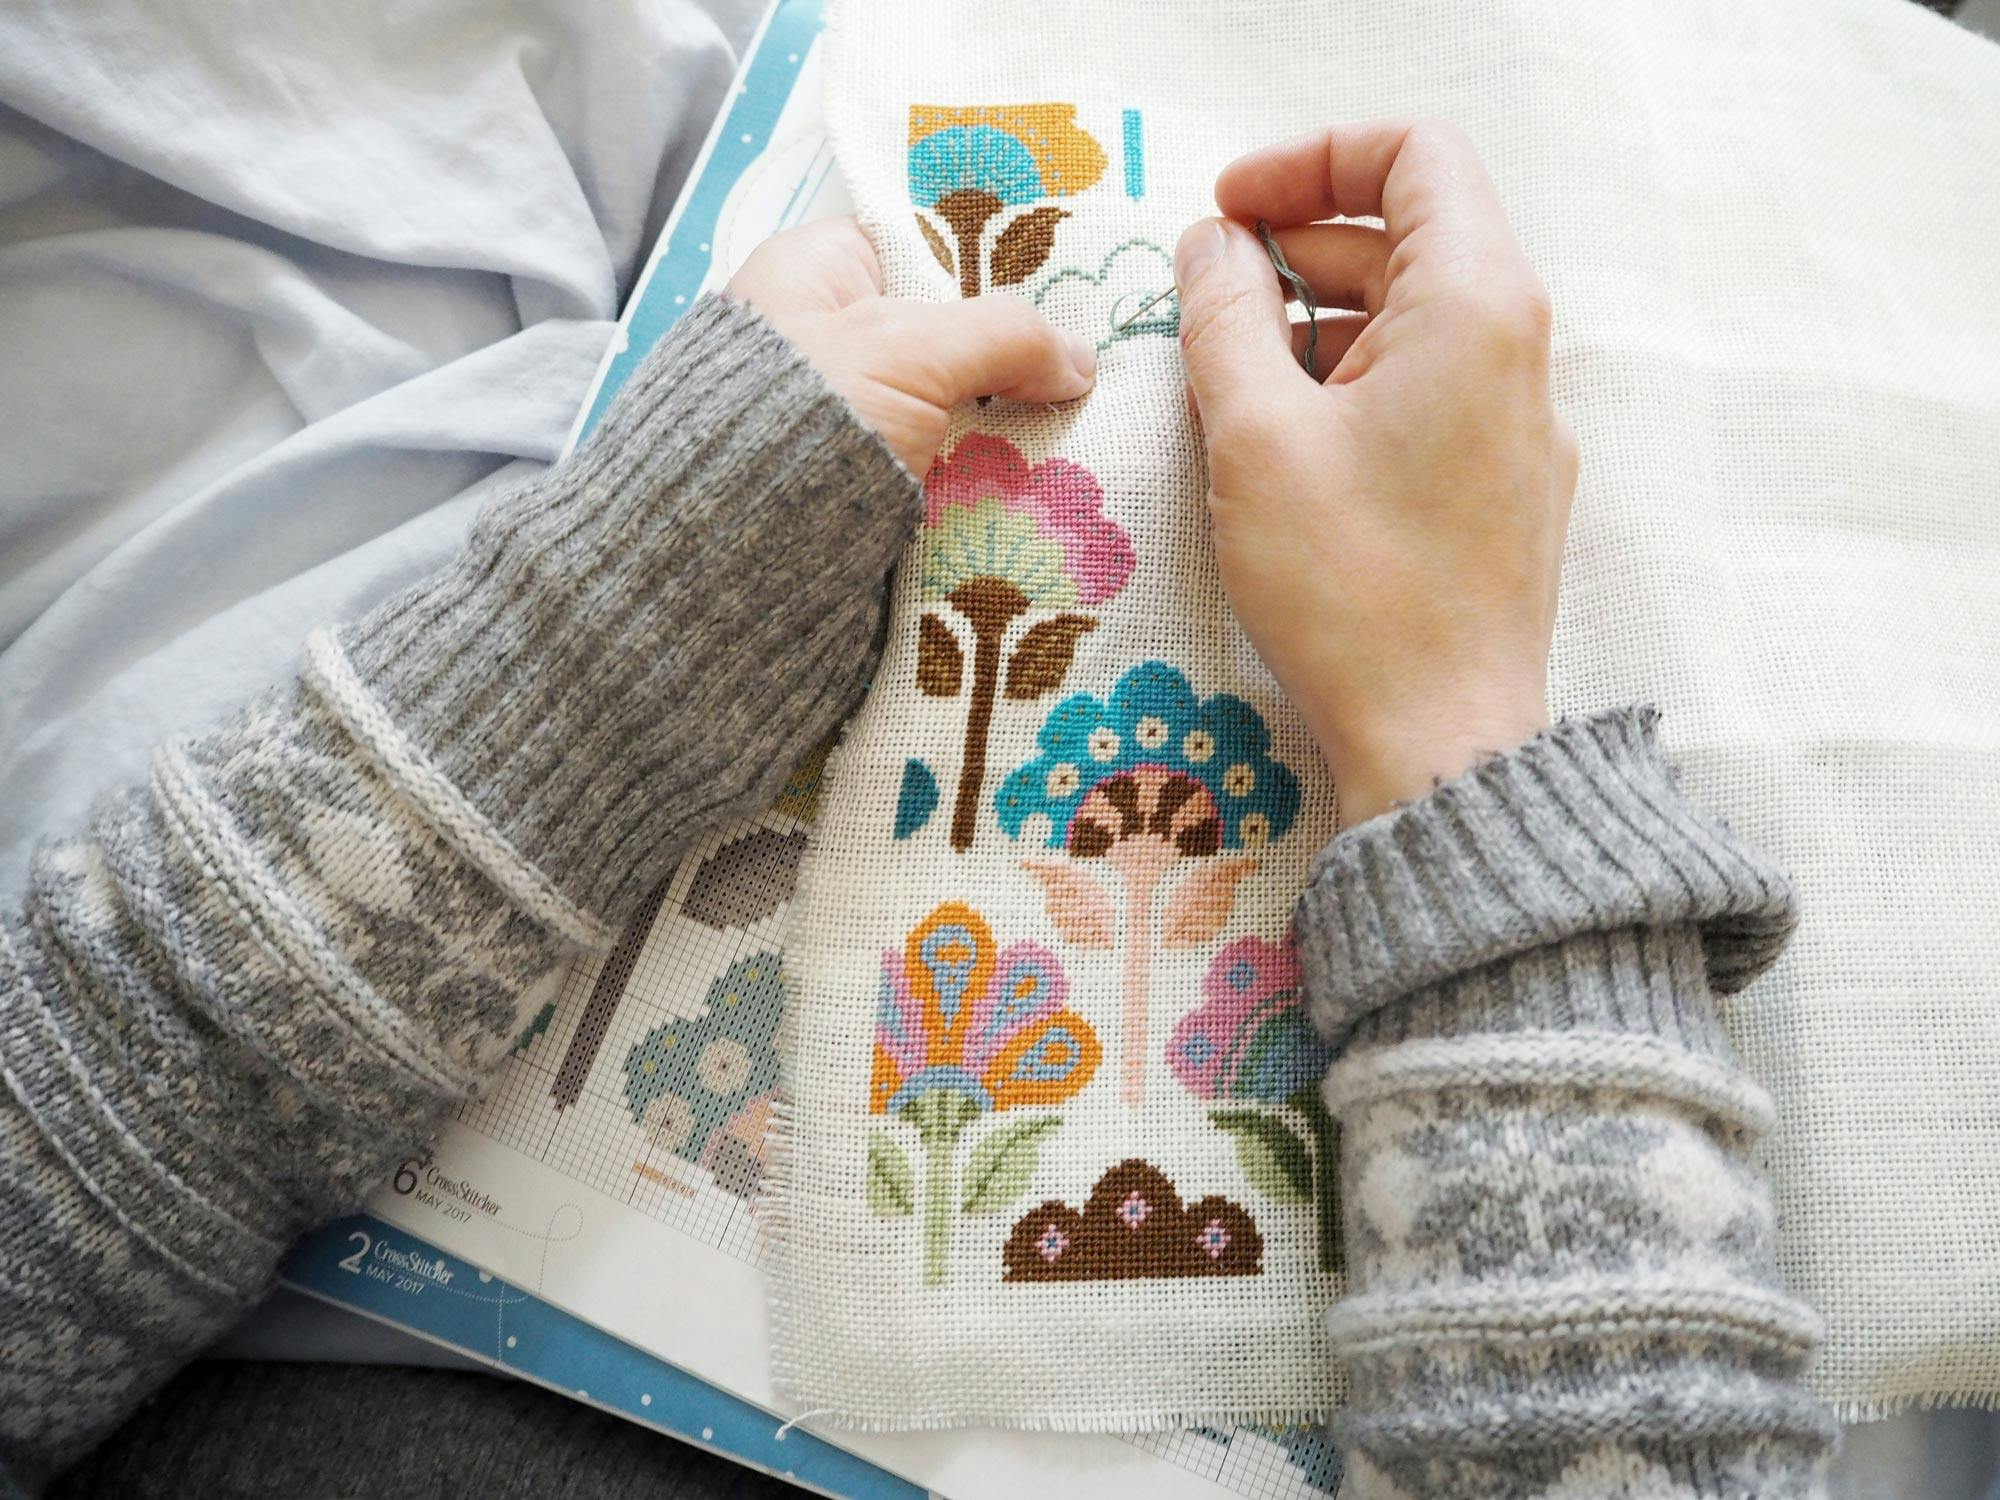  crafting flowers with hand embroidery 